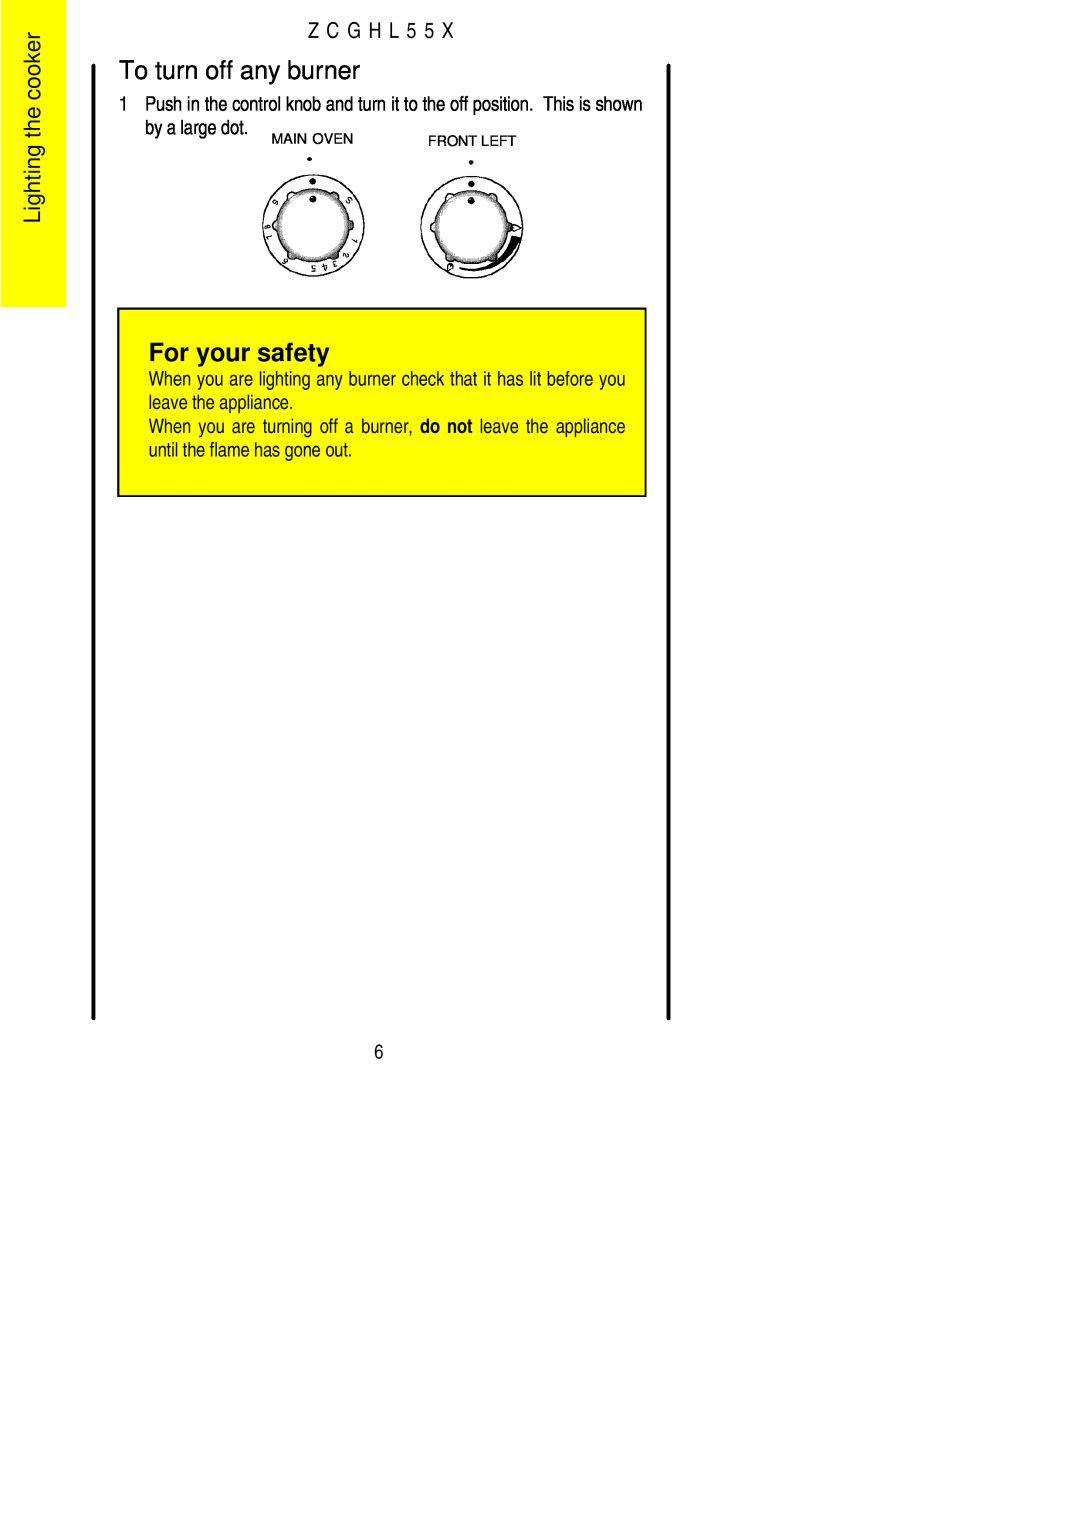 Zanussi ZCGHL55X manual To turn off any burner, For your safety, Lighting the cooker, Z C G H L 